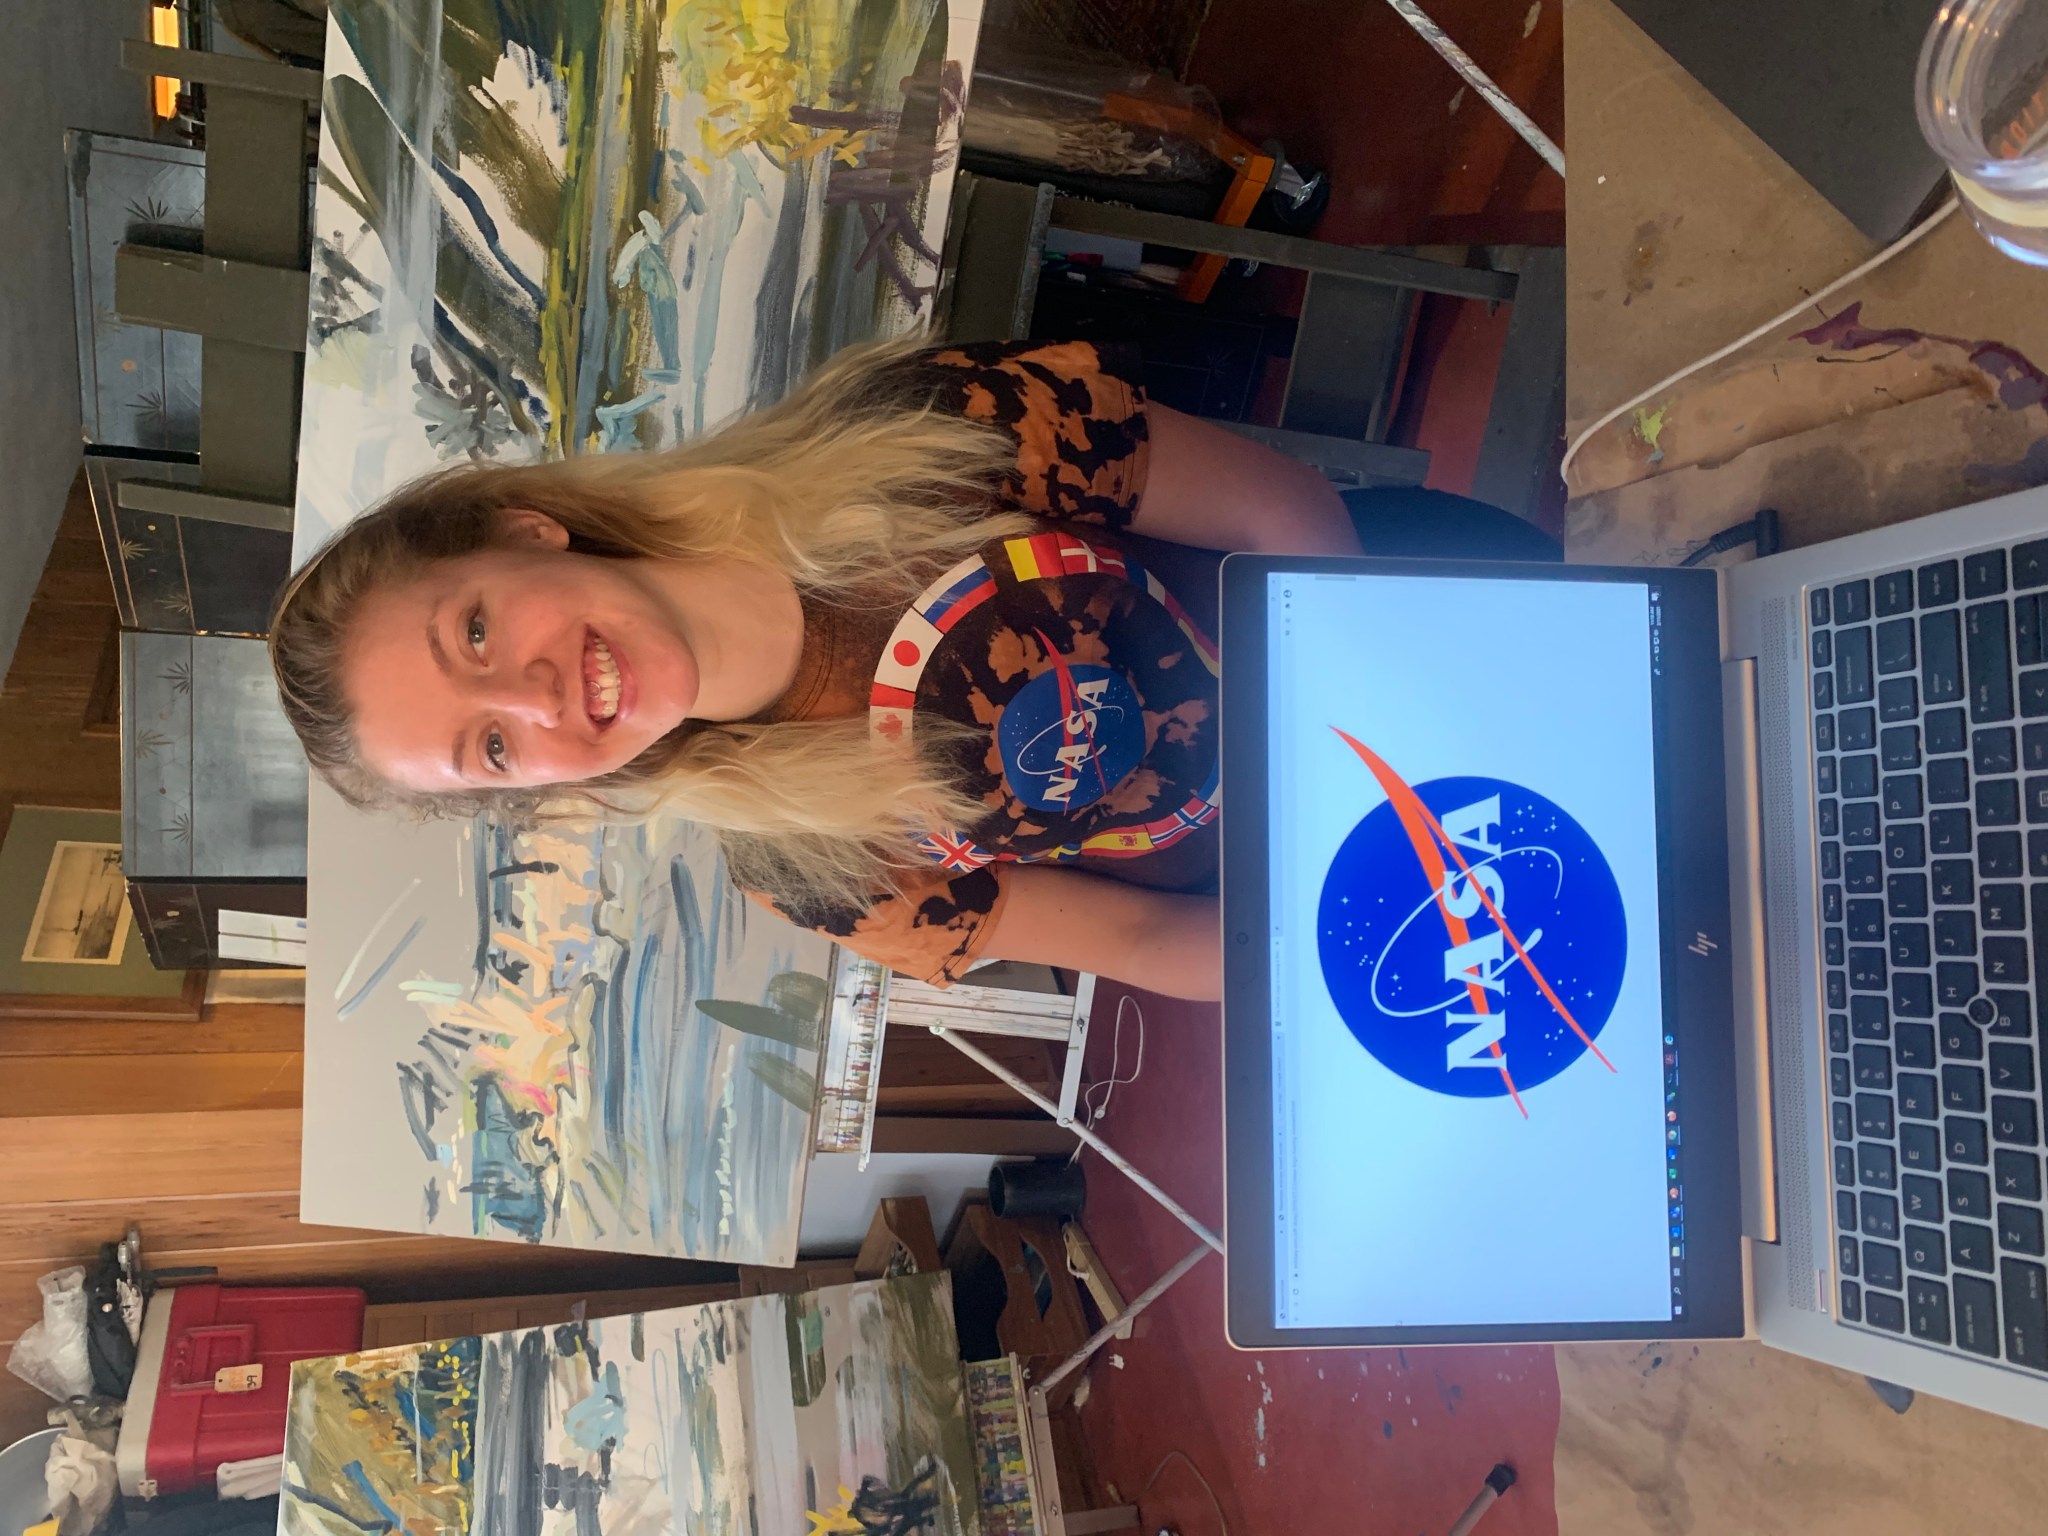 NASA Langley intern Mills Selkregg was emotional when she got the news that she would be joining the NASA family.